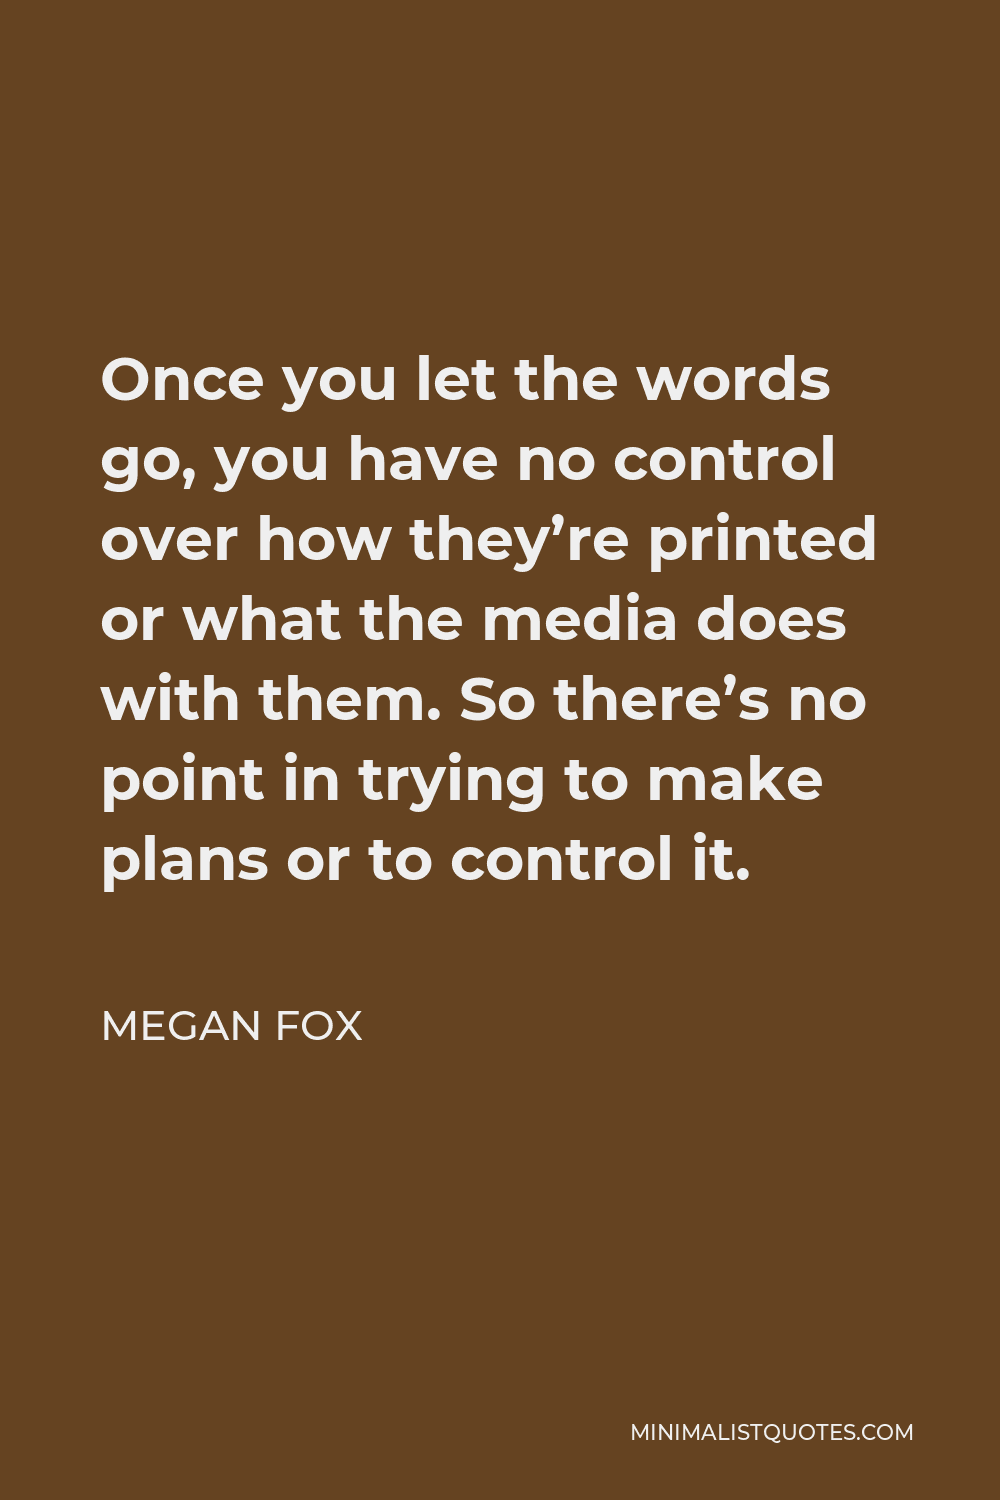 Megan Fox Quote - Once you let the words go, you have no control over how they’re printed or what the media does with them. So there’s no point in trying to make plans or to control it.